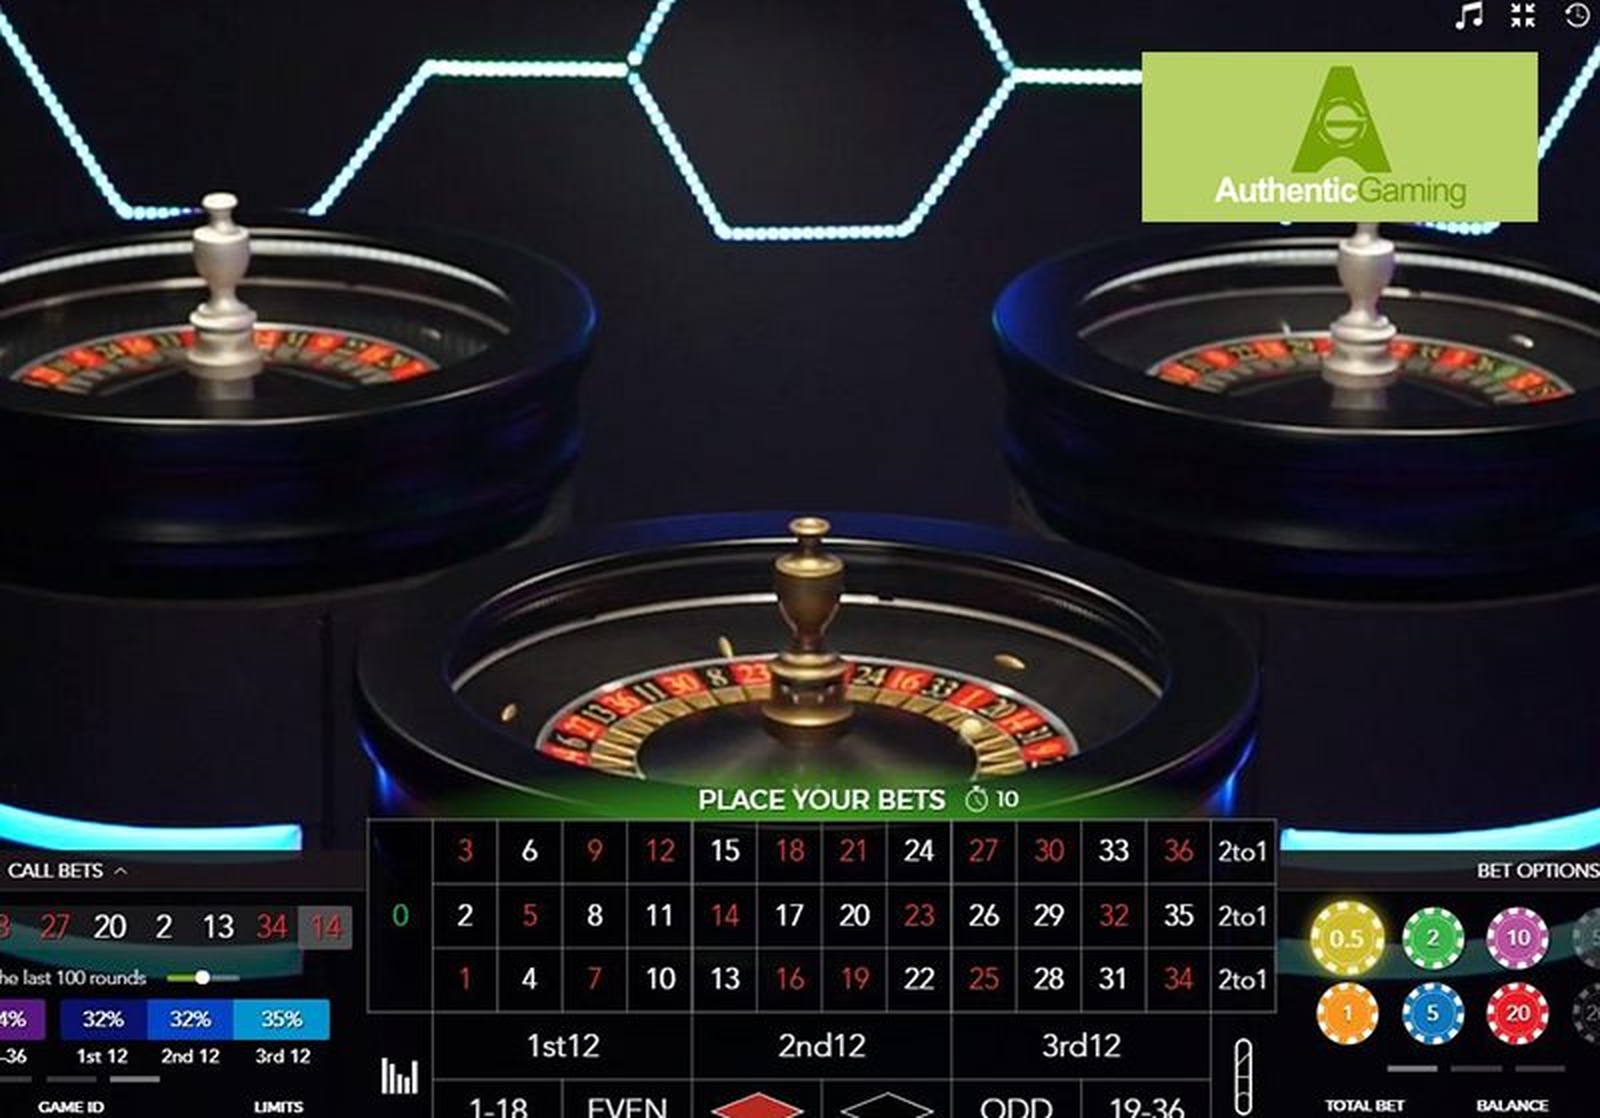 The Duo Live Auto Roulette Online Slot Demo Game by Authentic Gaming